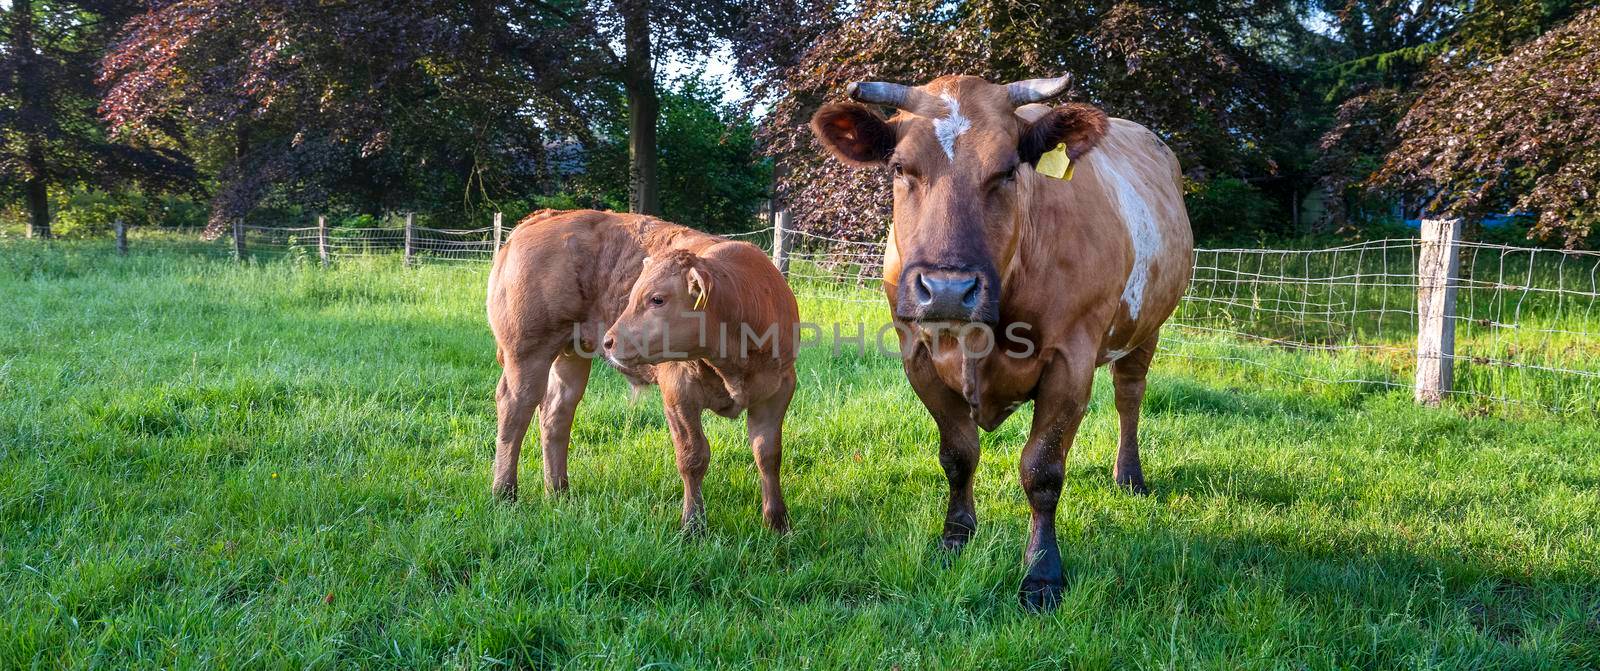 beef cow and brown calf together in green meadow near beech trees in holland by ahavelaar